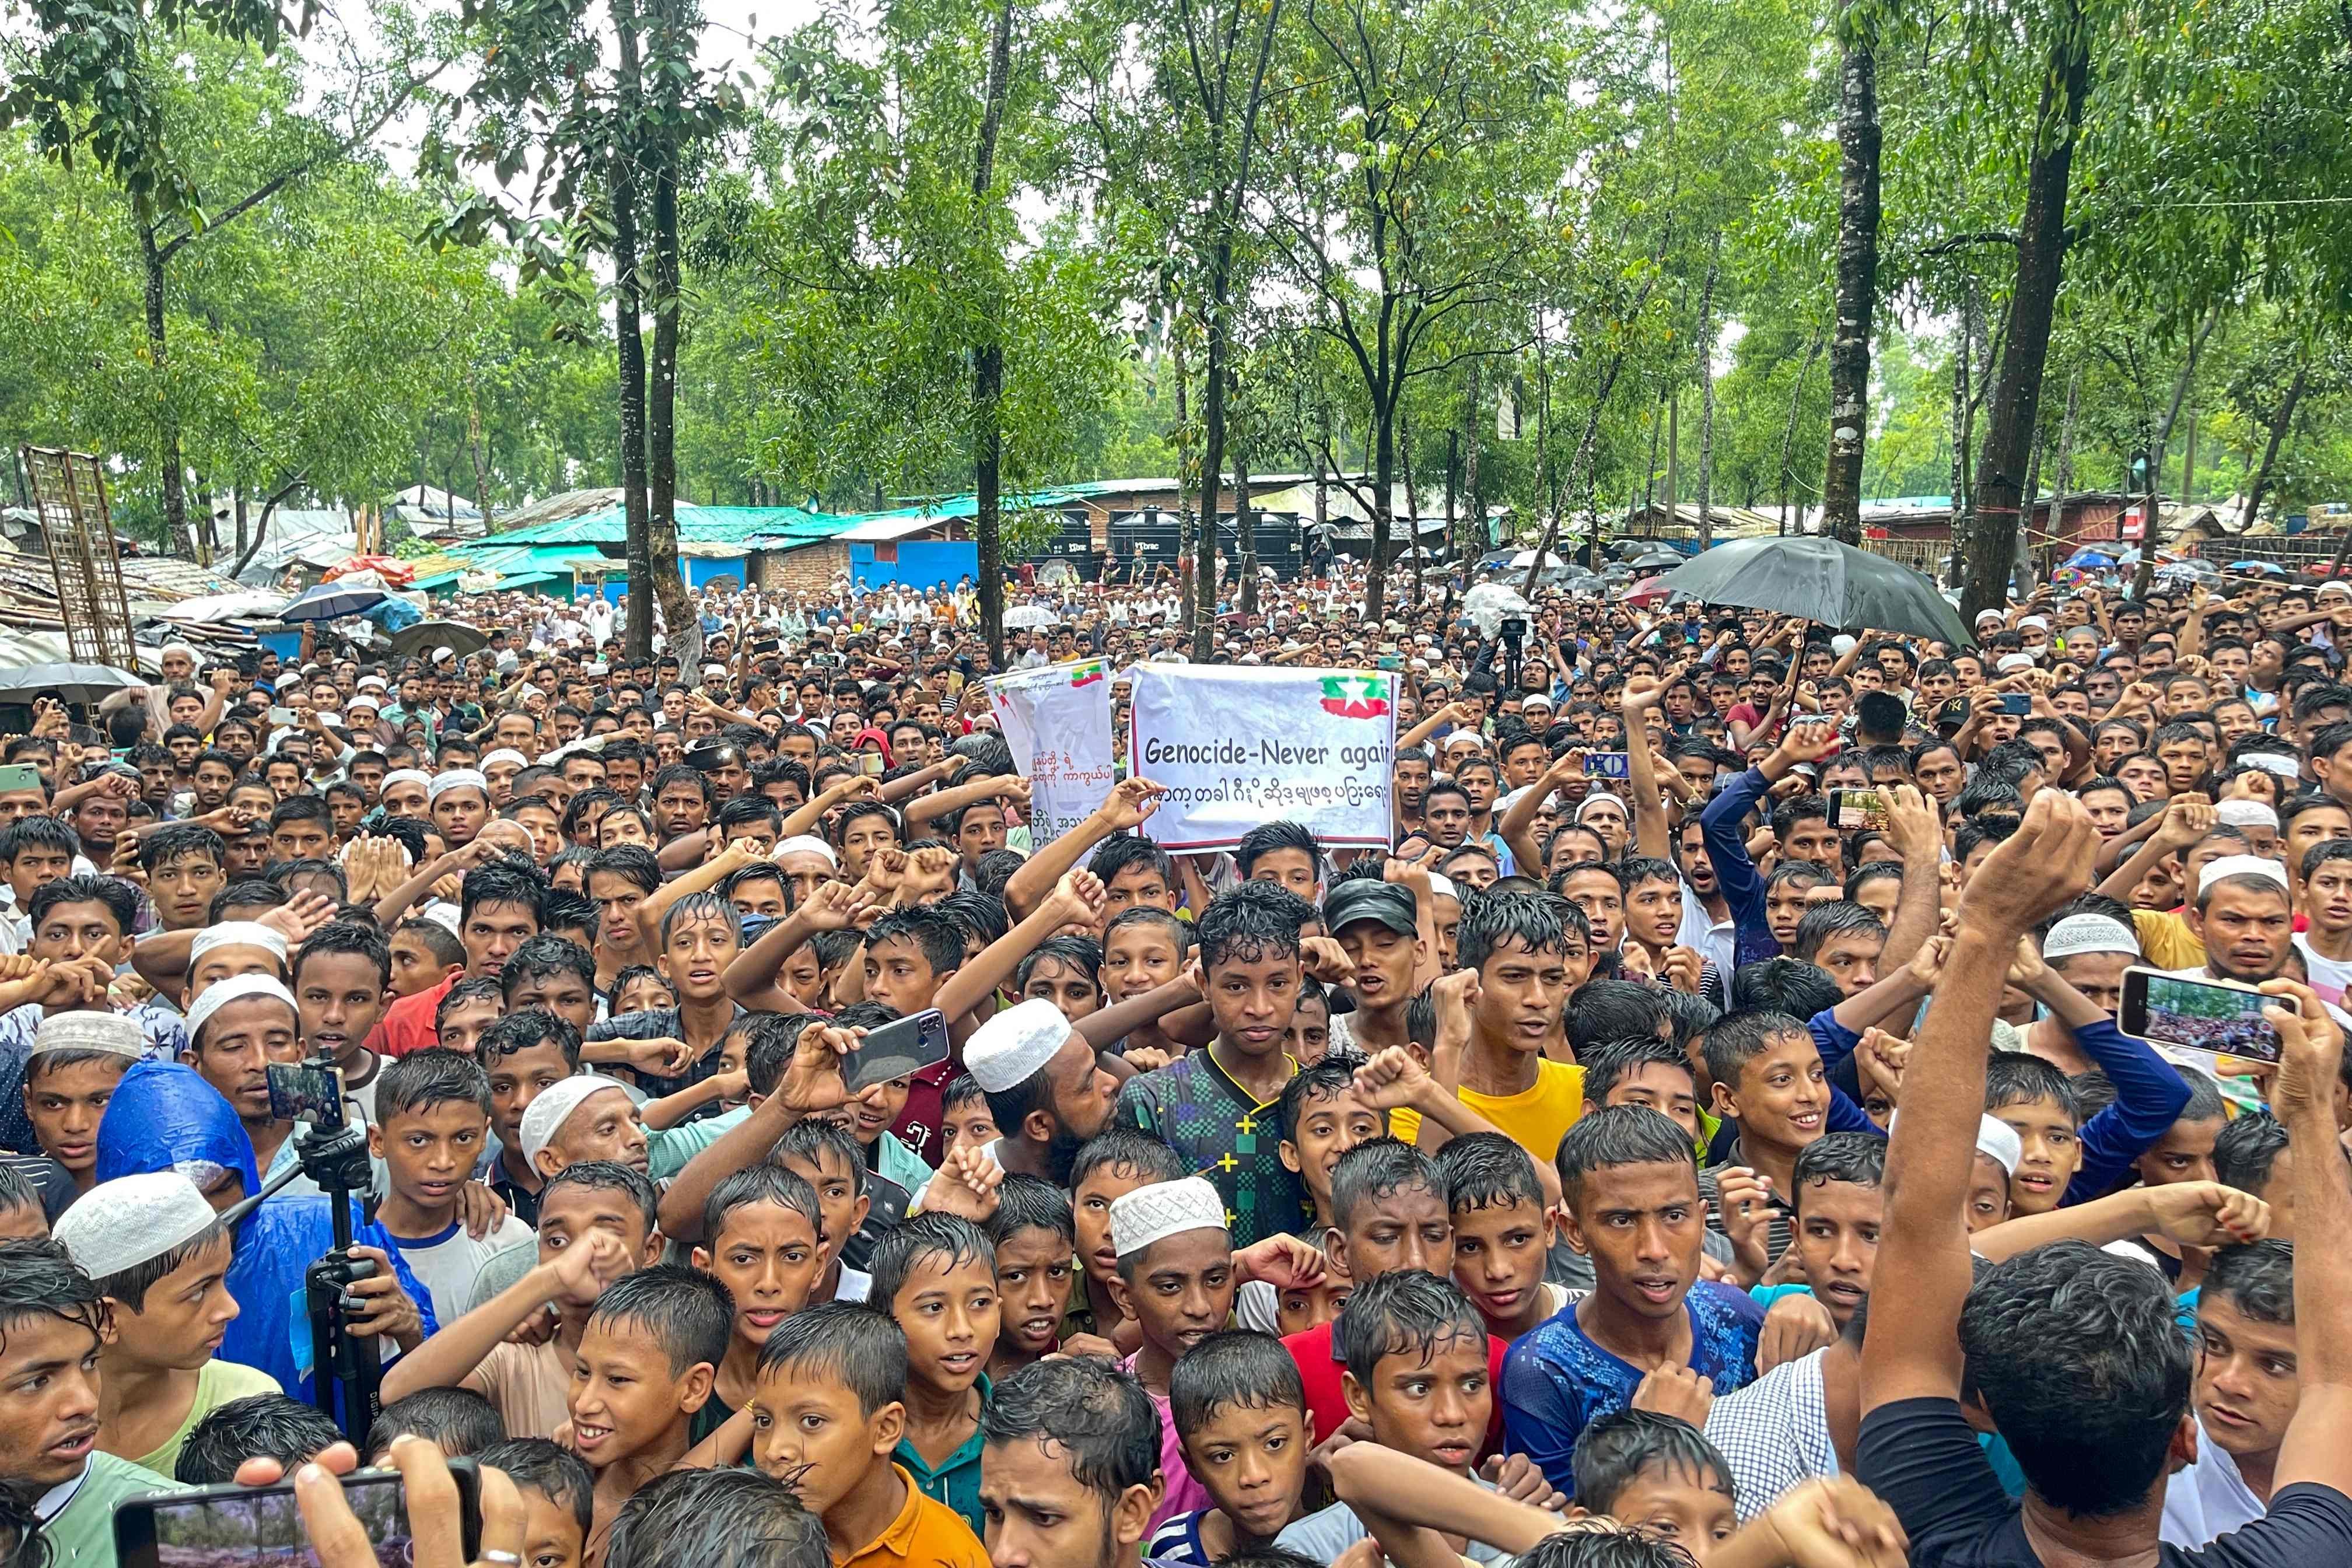 Rohingya refugees gather for a rally marking the 6th anniversary of “genocide day”, demanding their secured and dignified return to Myanmar. Photo: AFP